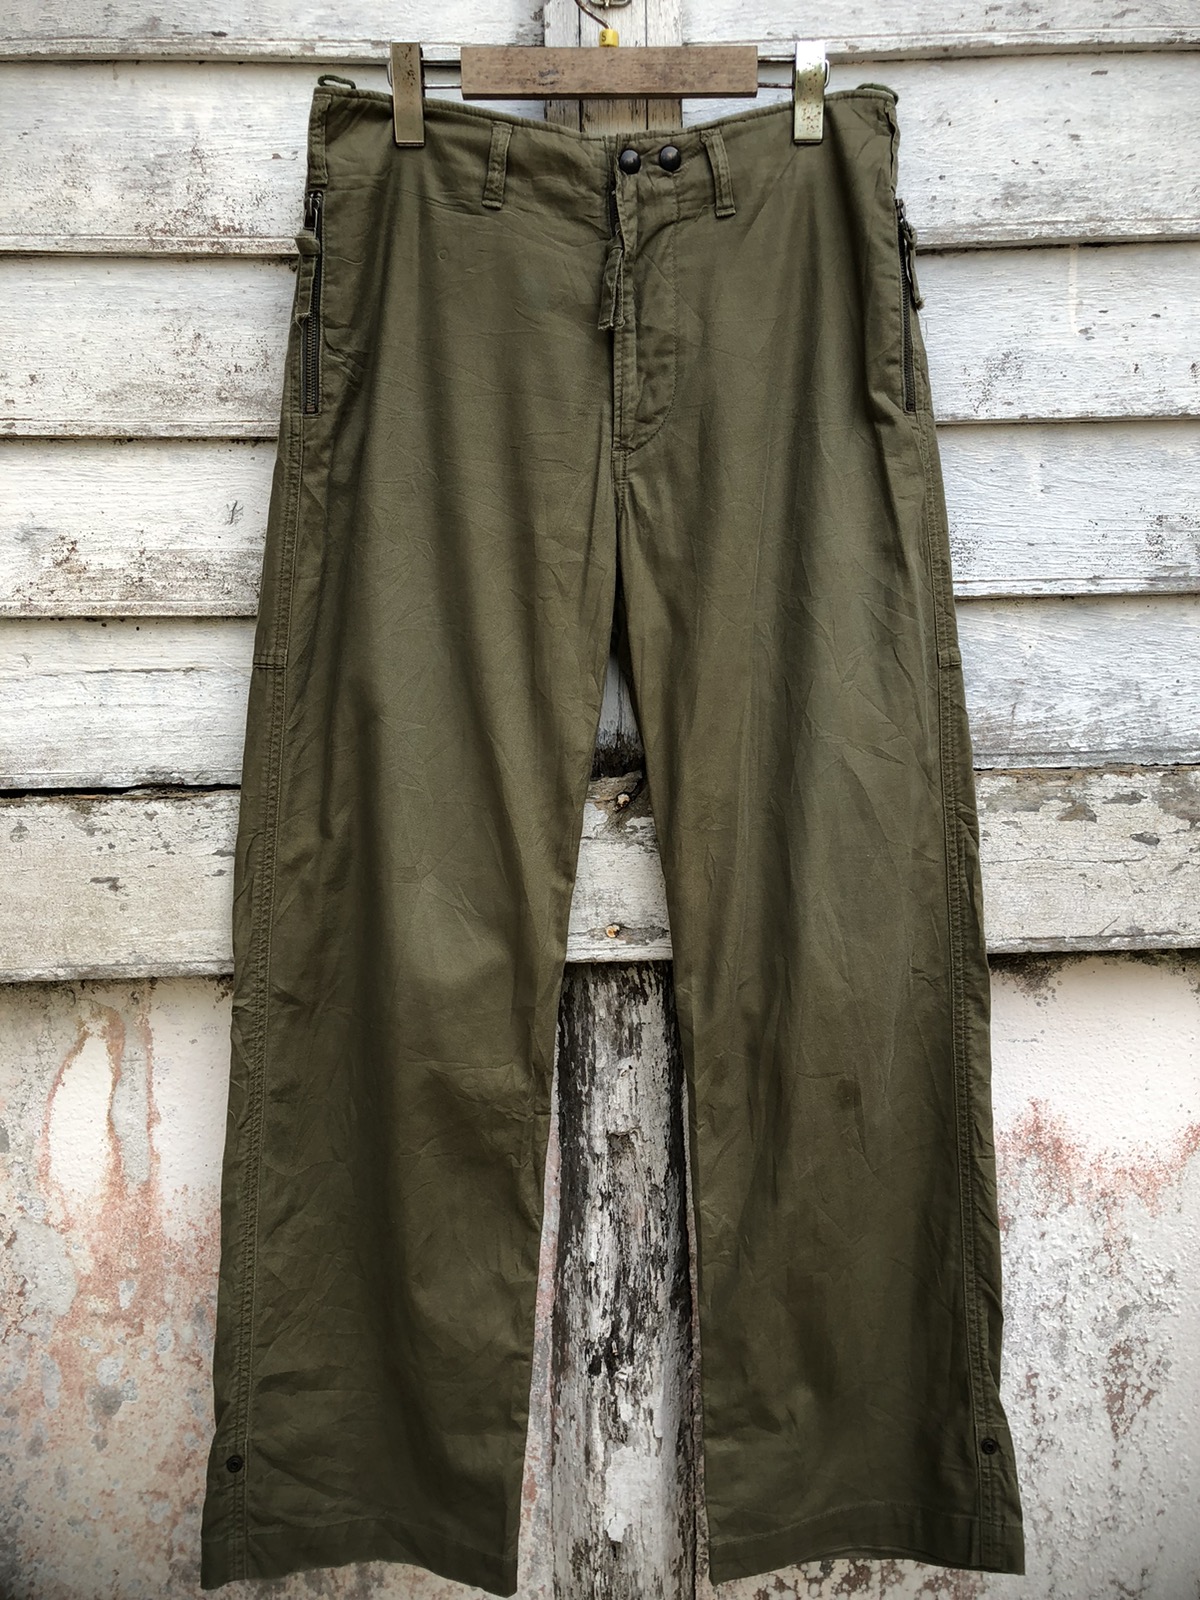 N. Hollywood Military Issues Trouser - 1